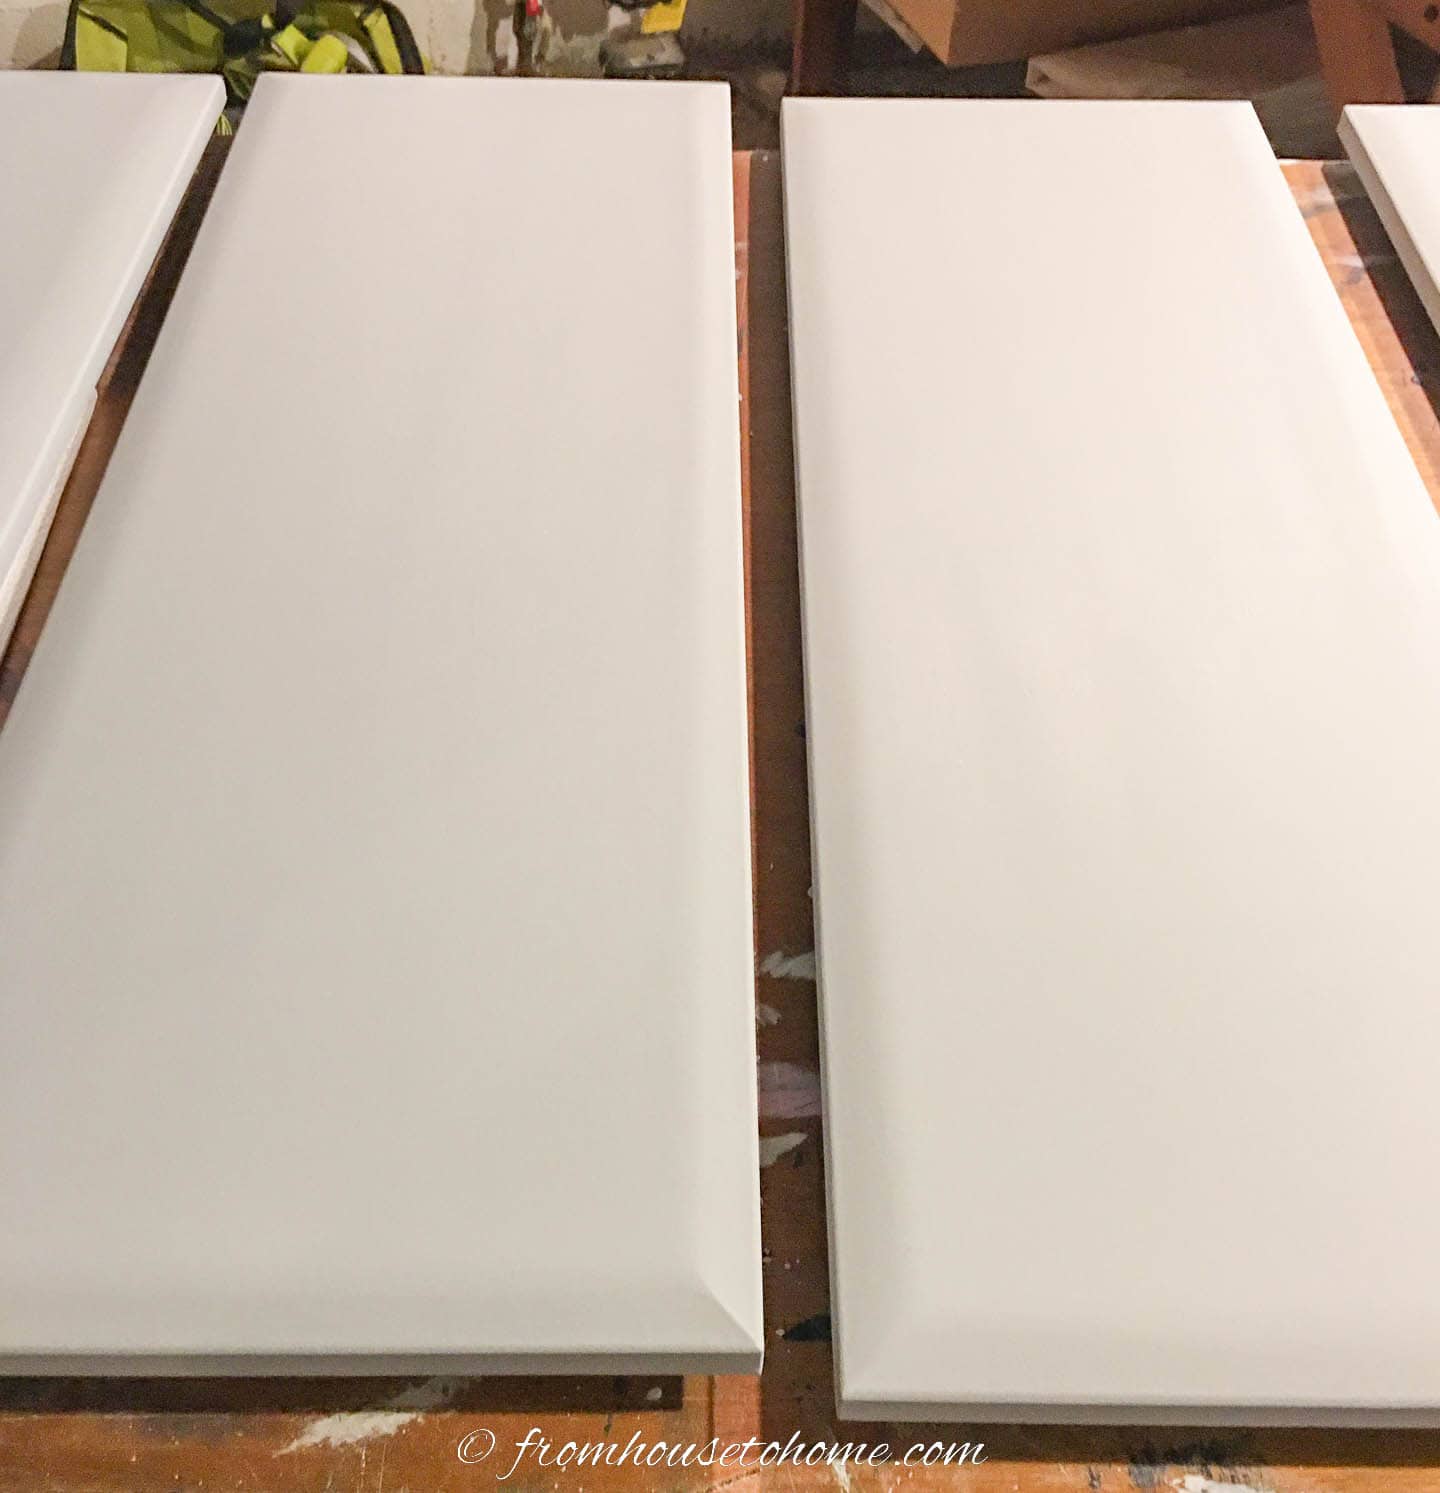 Pillow-front kitchen cabinet doors that have been primed